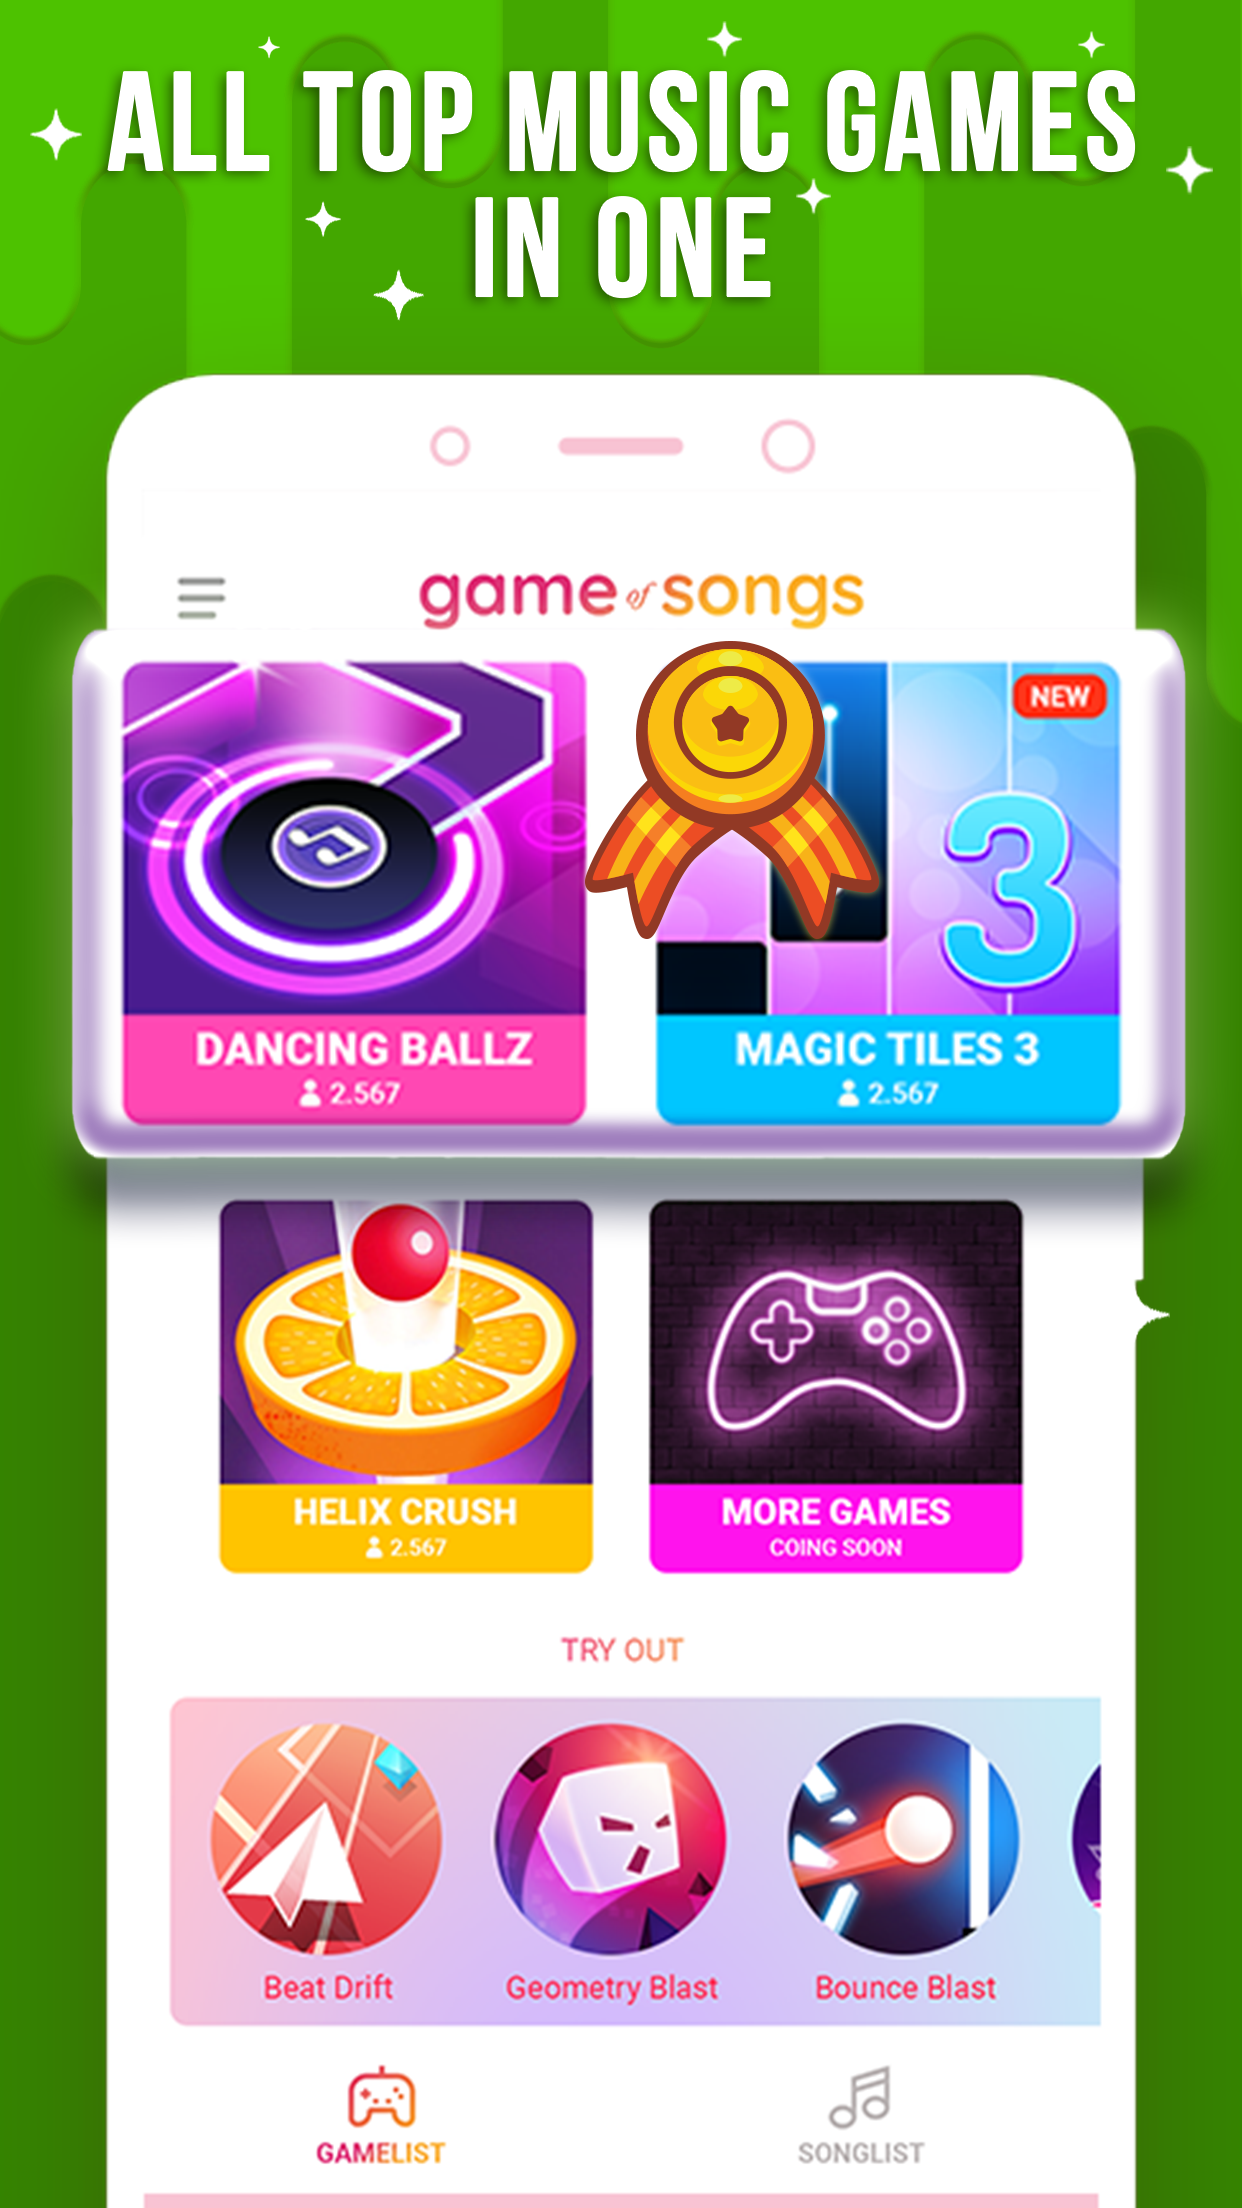 Game of Songs - Play most popular musics and gamesのキャプチャ